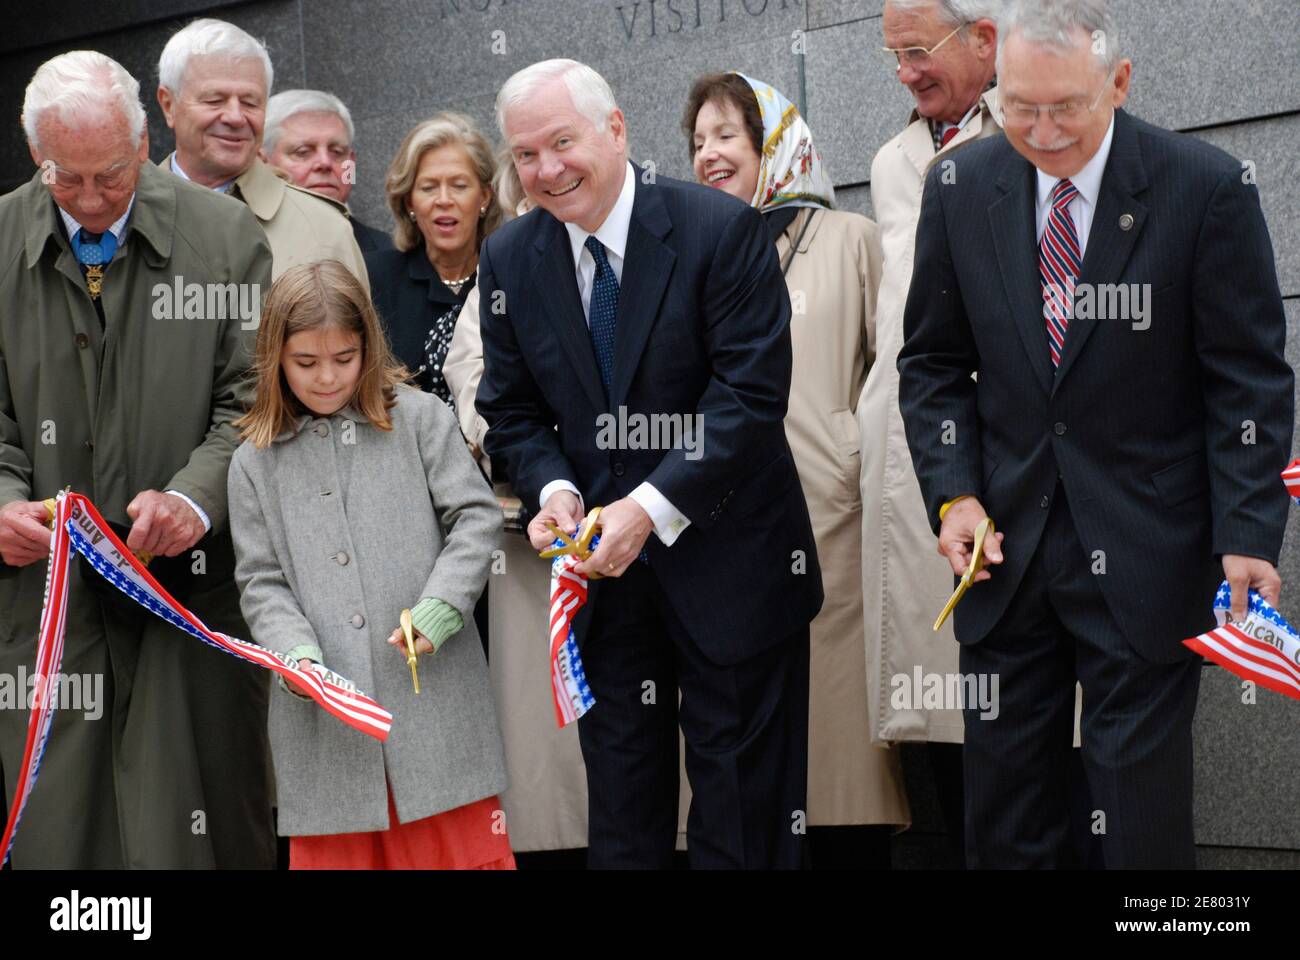 U.S. Defense Secretary Robert Gates (C) and Hannah Woolsey (2nd L), from the United States participate in a ribbon cutting ceremony for a new visitor's center at the Normandy American Cemetery in France, on the 63rd anniversary of D-Day in Colleville-sur-Mer June 6, 2007. REUTERS/Kristin Roberts (FRANCE) Stock Photo